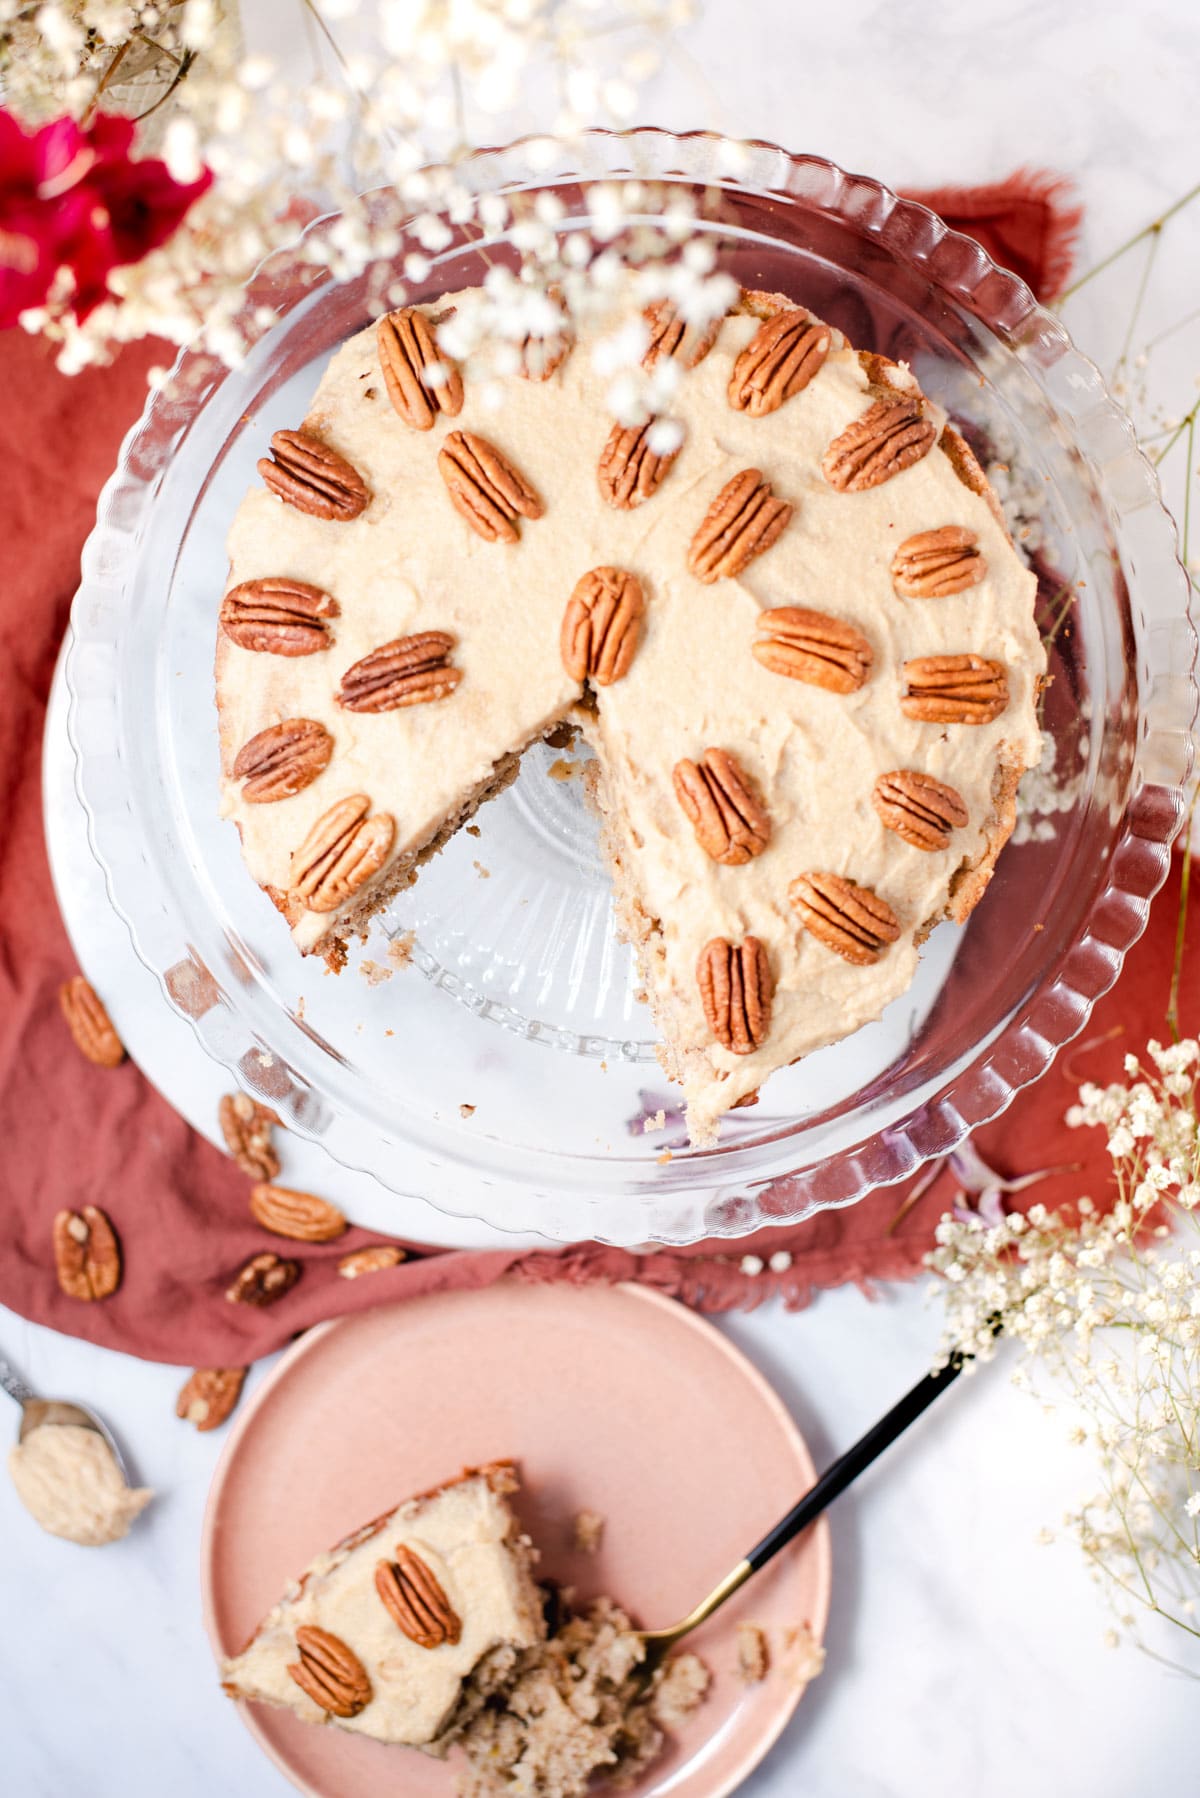 Overhead view of cake topped with pecans on a glass cake stand